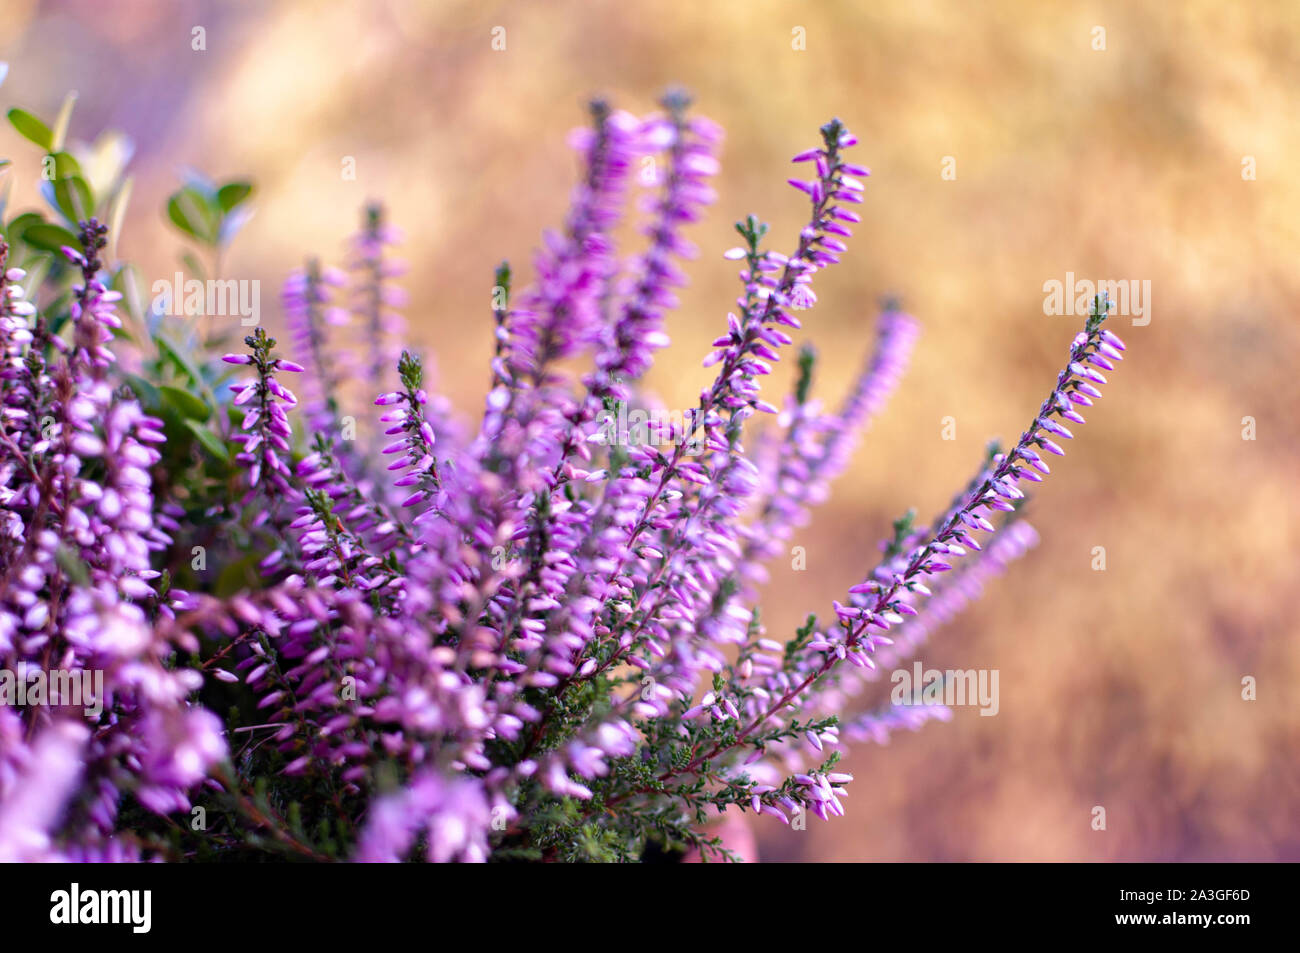 Erica plants, winter flowers in pink and purple close up. Symbol of winter cold time and holidays. Stock Photo